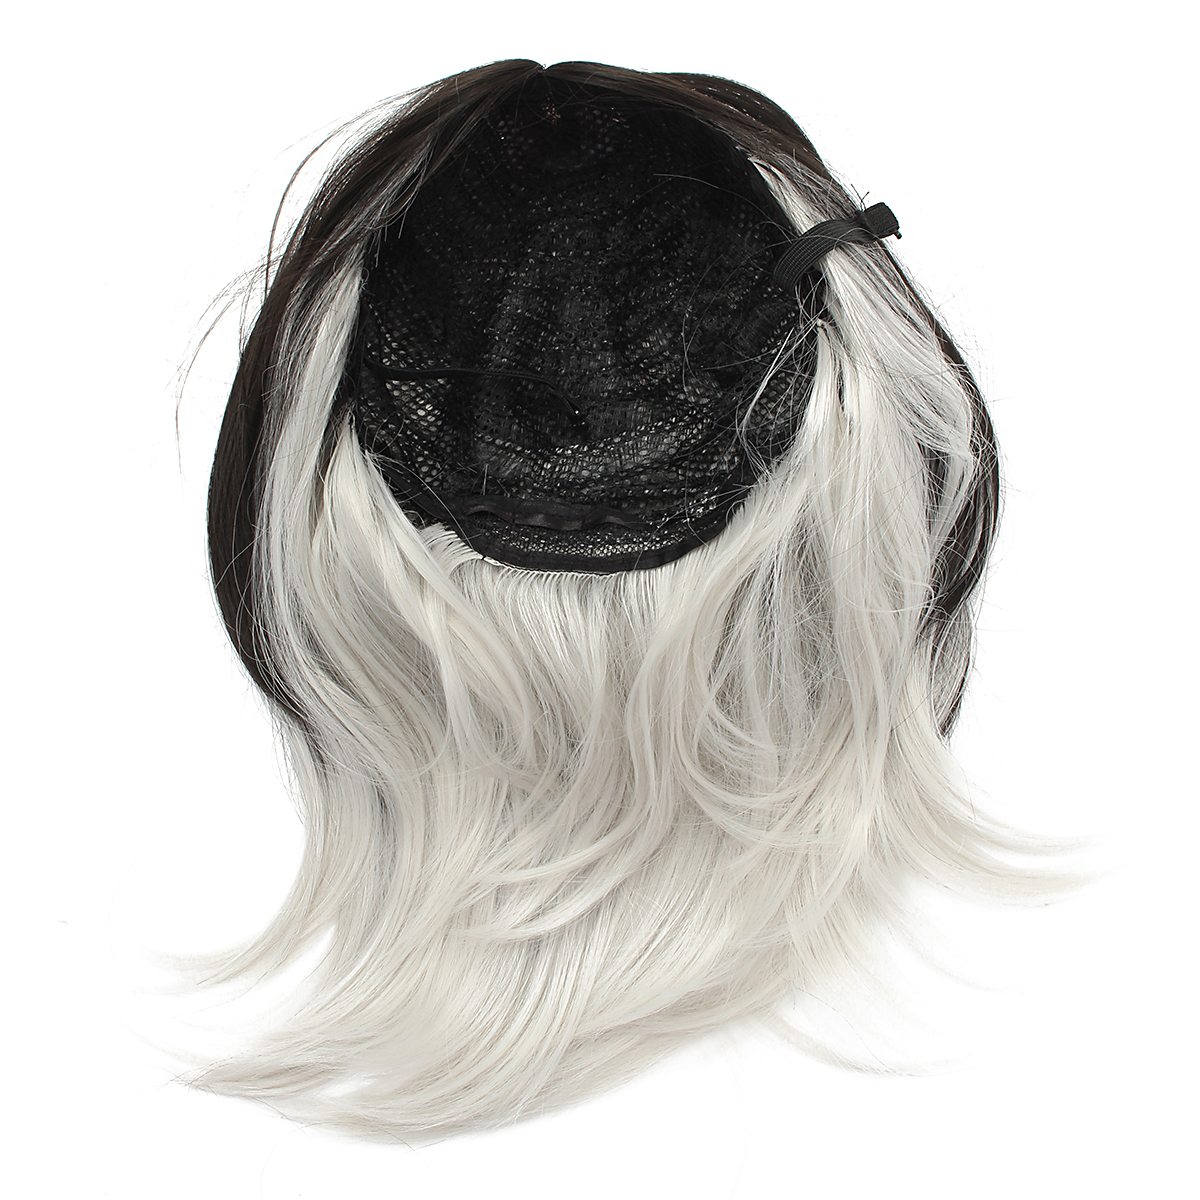 Greyish-White-Heat-Resistant-Synthetic-Fiber-Full-Hair-Wig-Cosplay-Costume-Rose-Play-1143560